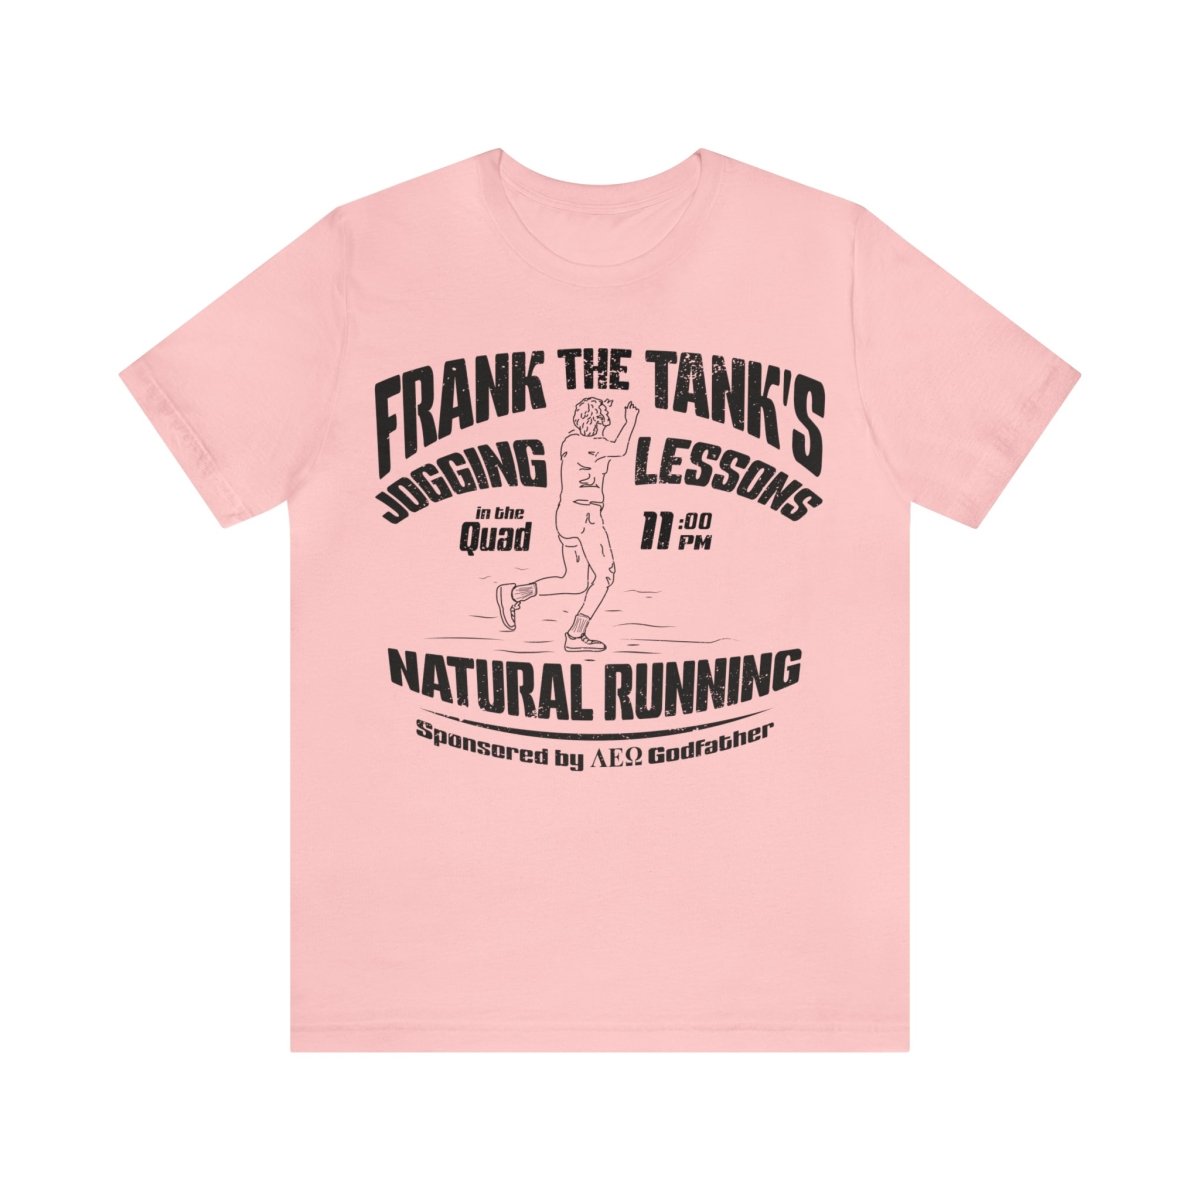 Frank The Tank Premium T-Shirt, Jogging Lessons, Run Naturally, Fraternity Sponsored, In The Quad, College Life, Funny